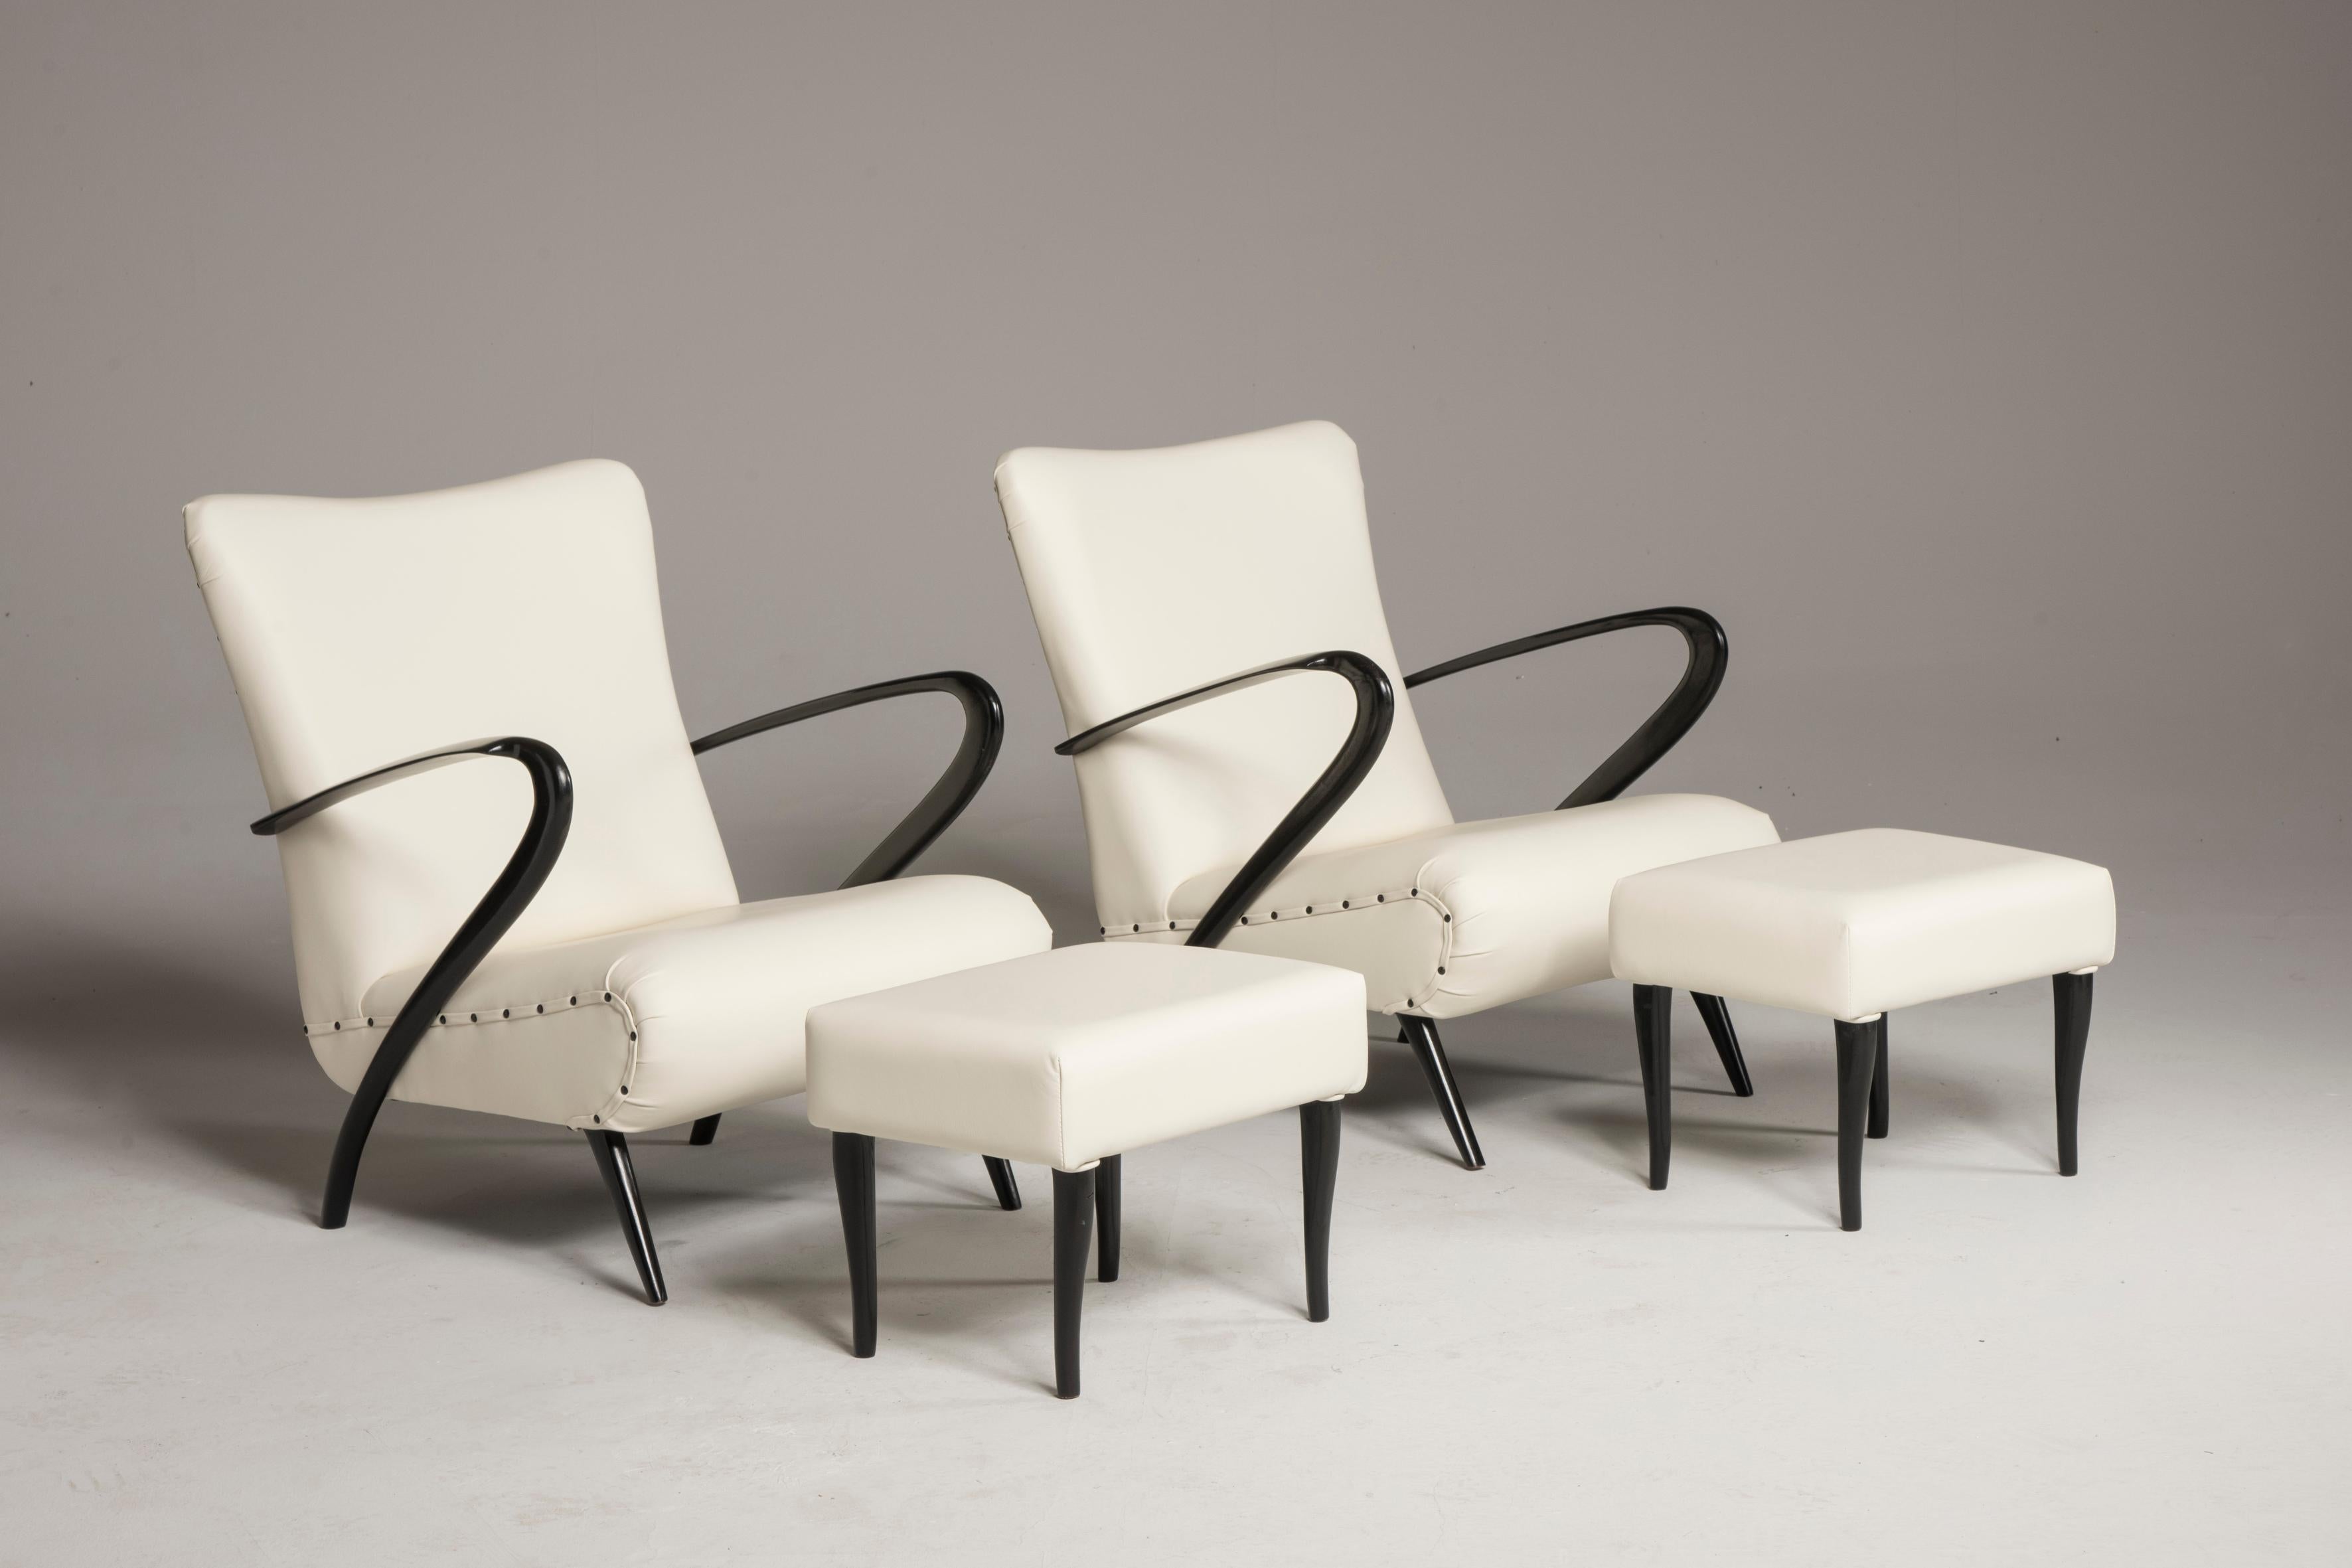 Midcentury white leather black wood armchairs with pouffs.
A pair of armchairs with pouffs from Italy from 1950s period.
They have been reupholstered in premium quality white leather. We have substituted the paddings and restored in conservative